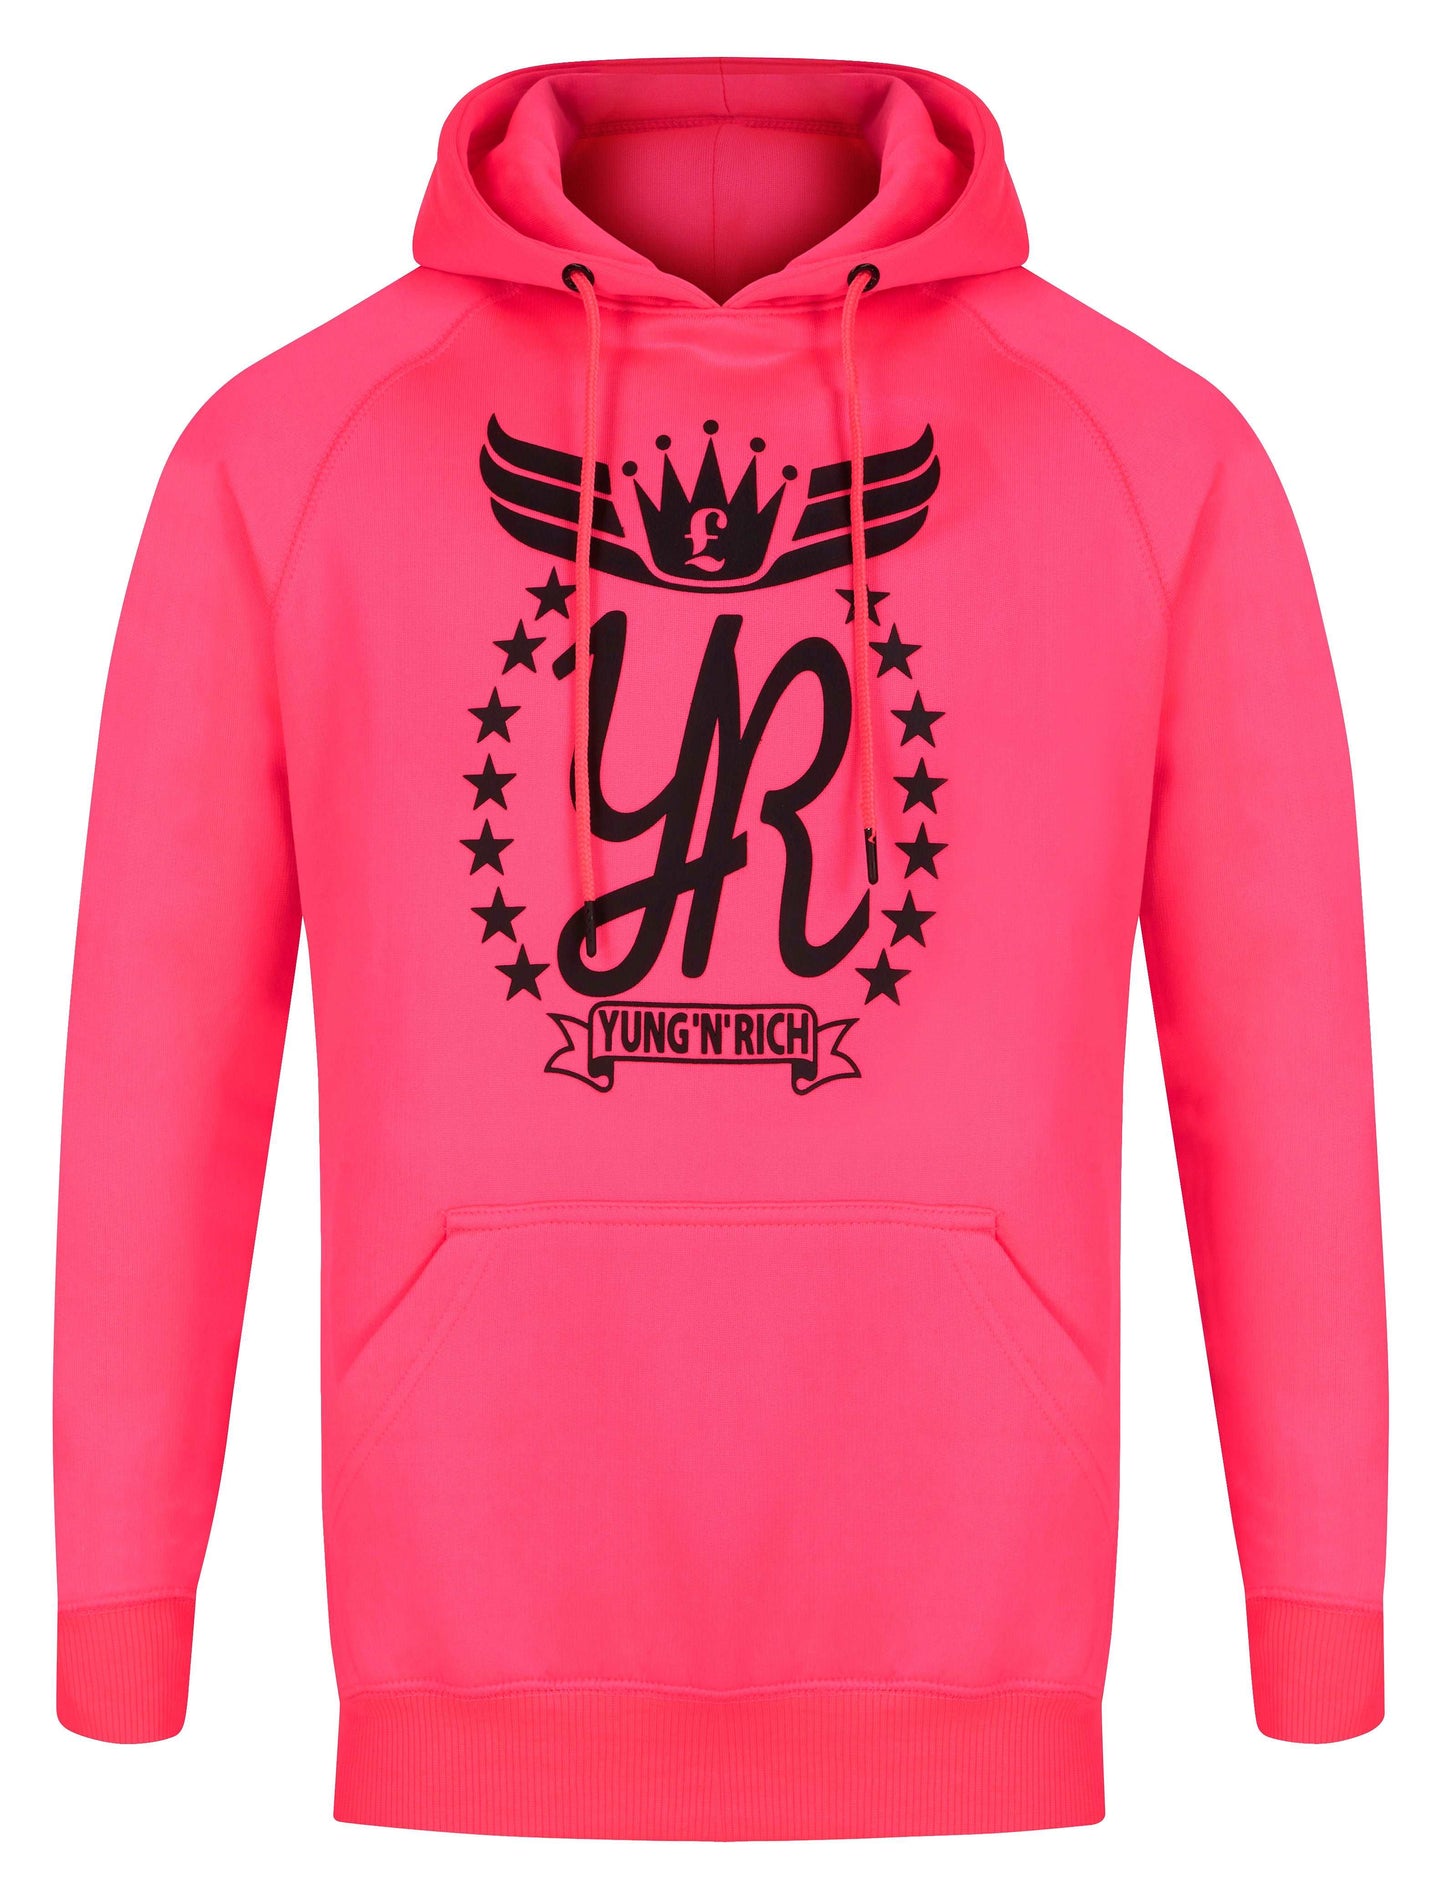 YUNG'N'RICH HOODIE - colour Neon Pink with black rubber Yungnrich logo